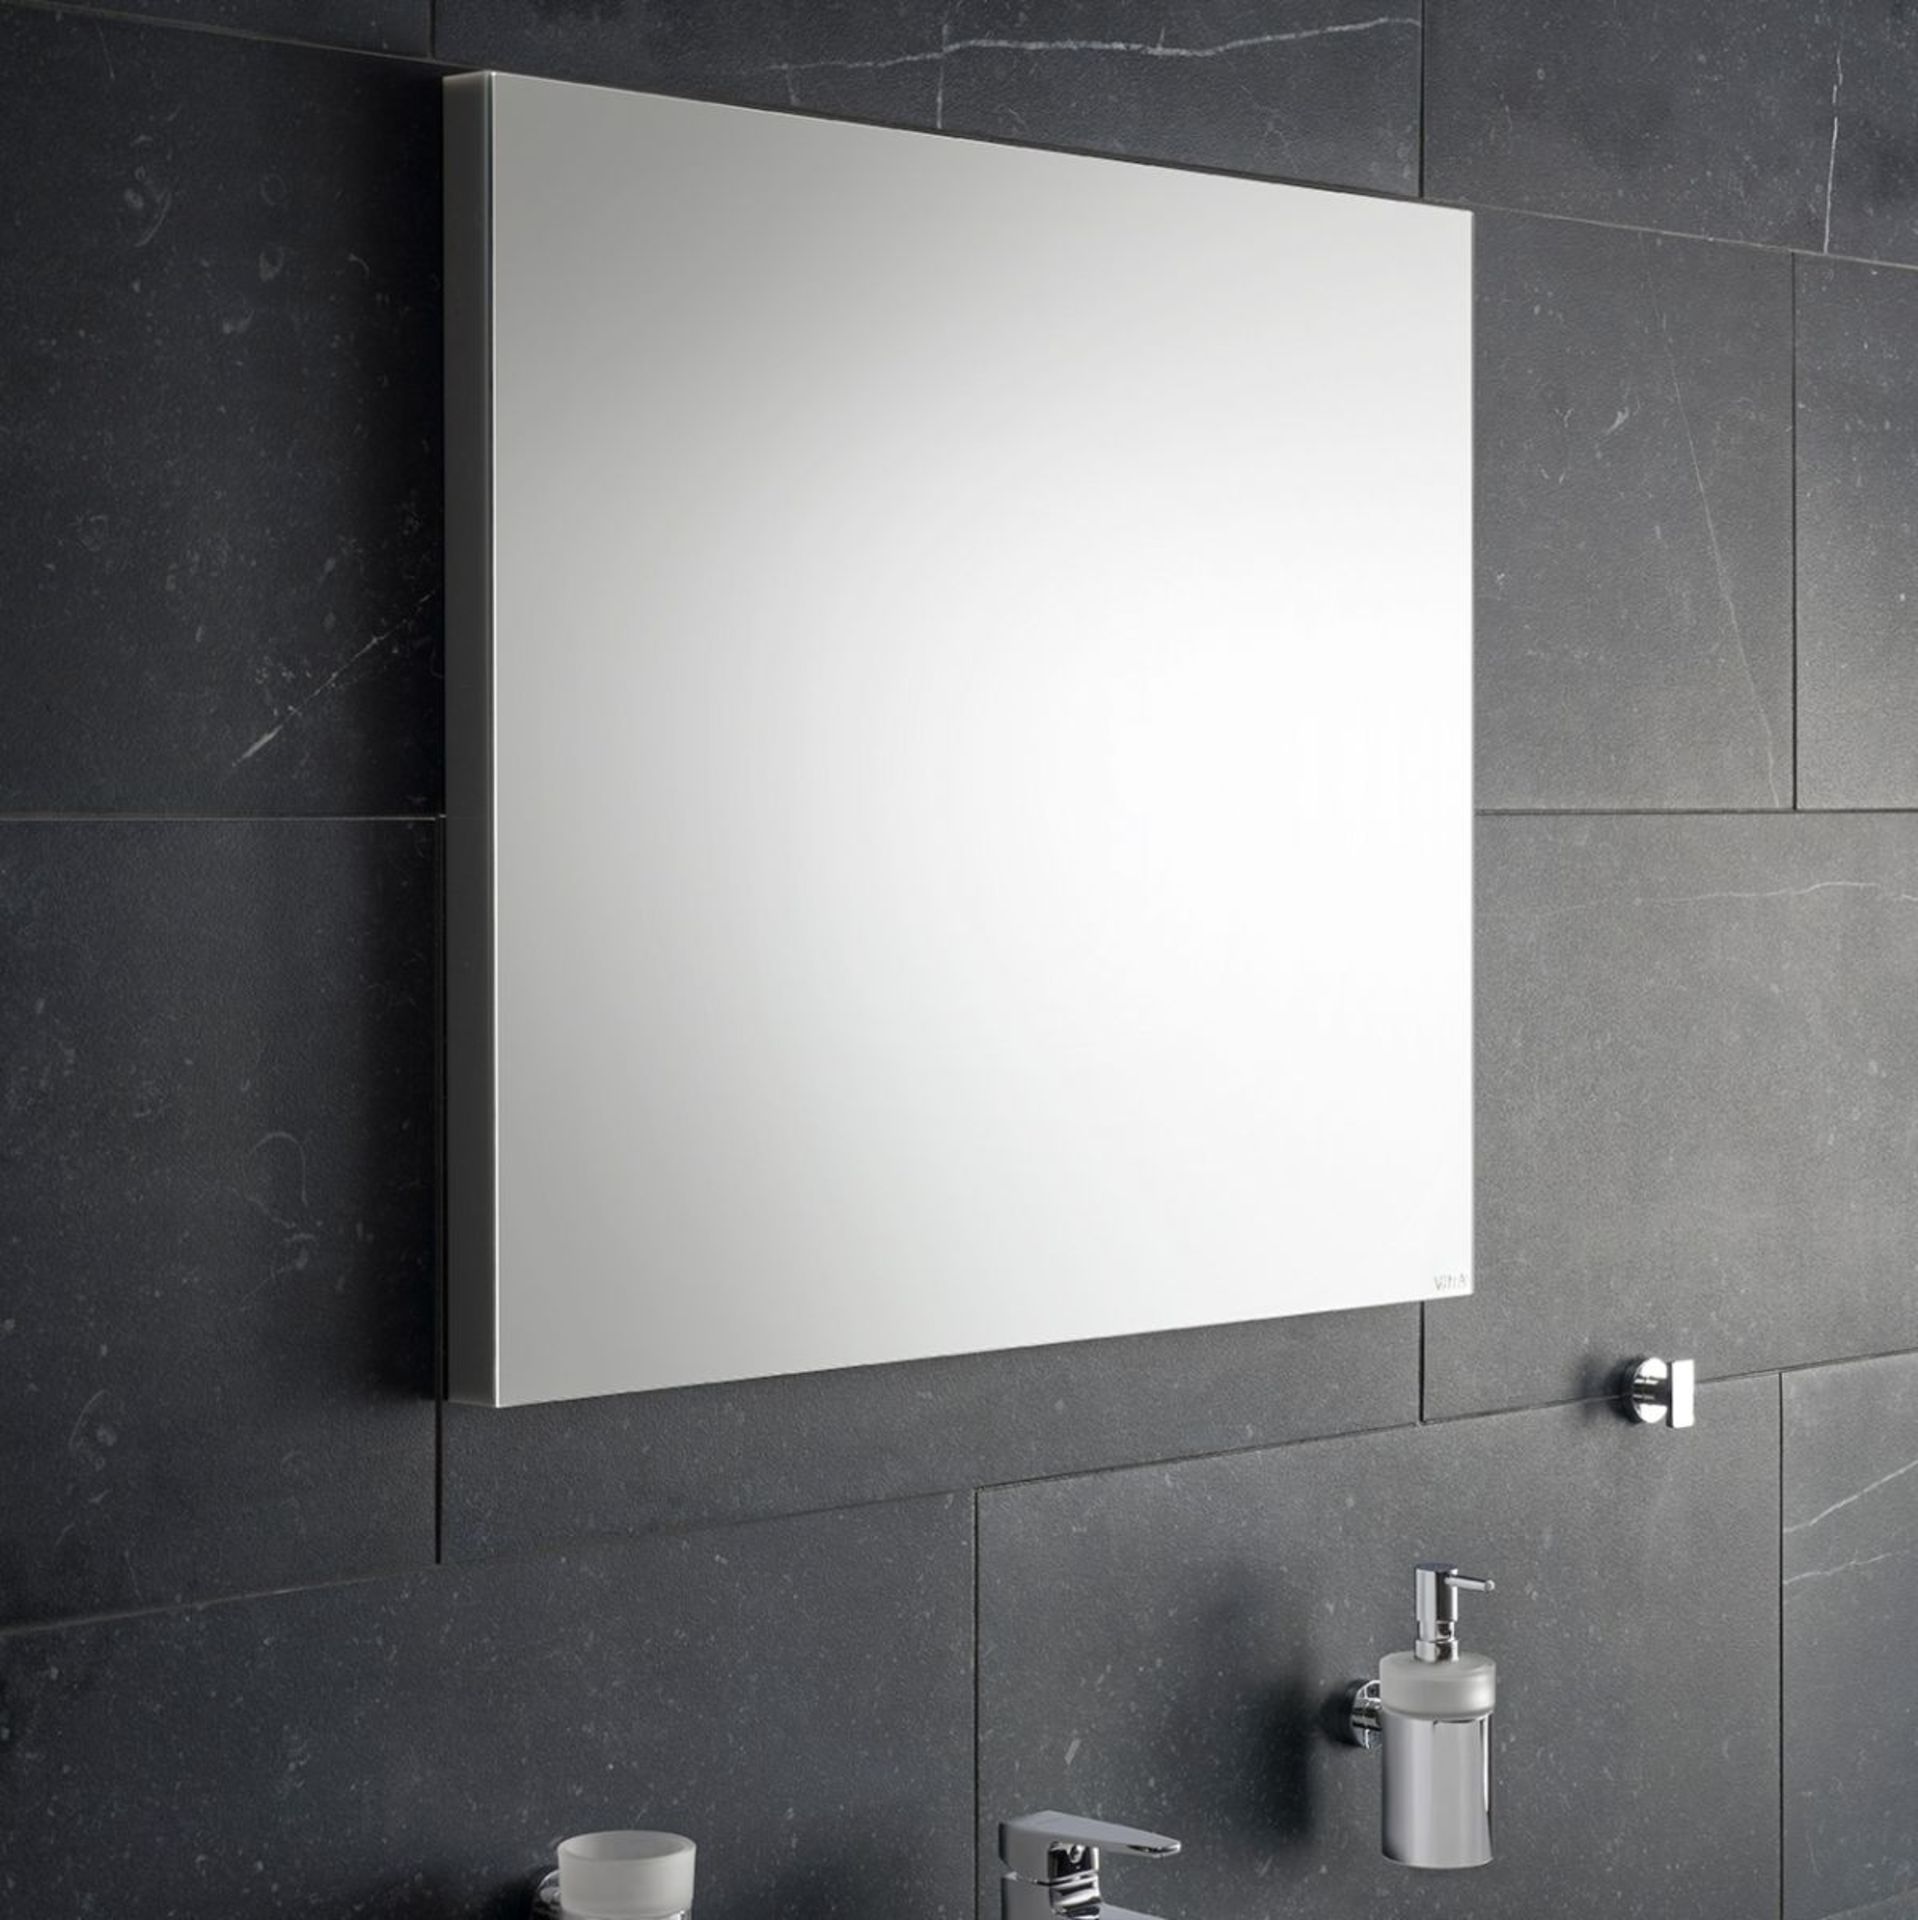 1 x VitrA Brite Illuminated Parallel Sides Mirror (60cm) - New Boxed Stock - RRP: £195 - Image 2 of 3